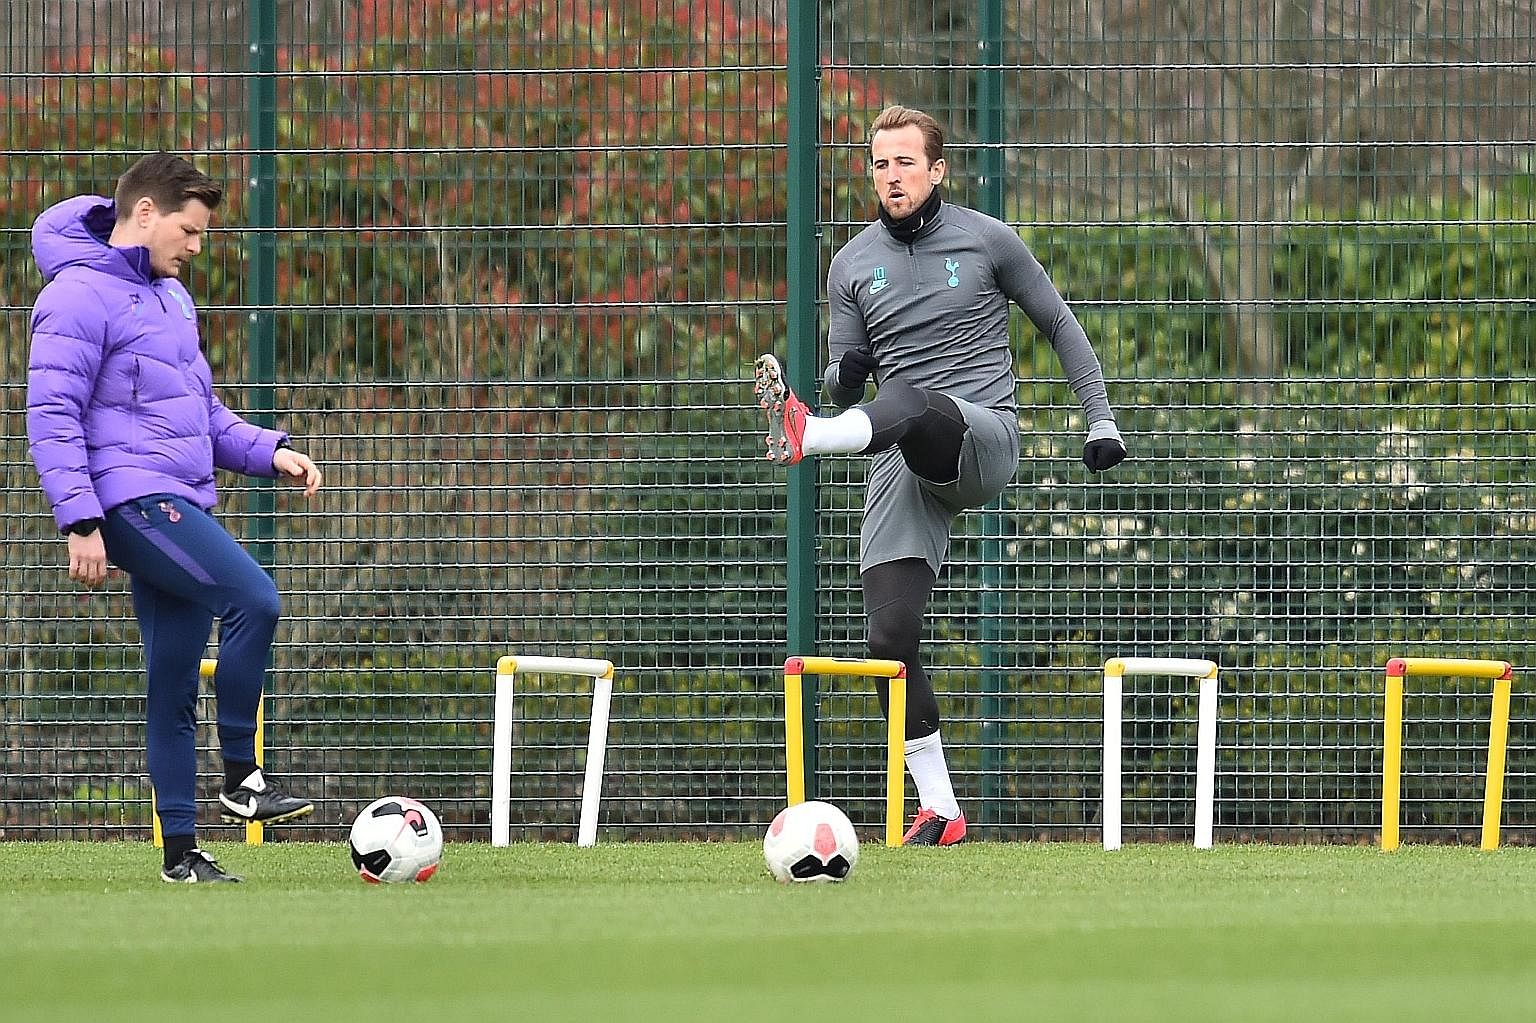 Harry Kane warming up during a Tottenham training session before the Premier League was suspended in March. The three-month hiatus has allowed the striker to recover from an operation on his hamstring and he is set to feature when action resumes this